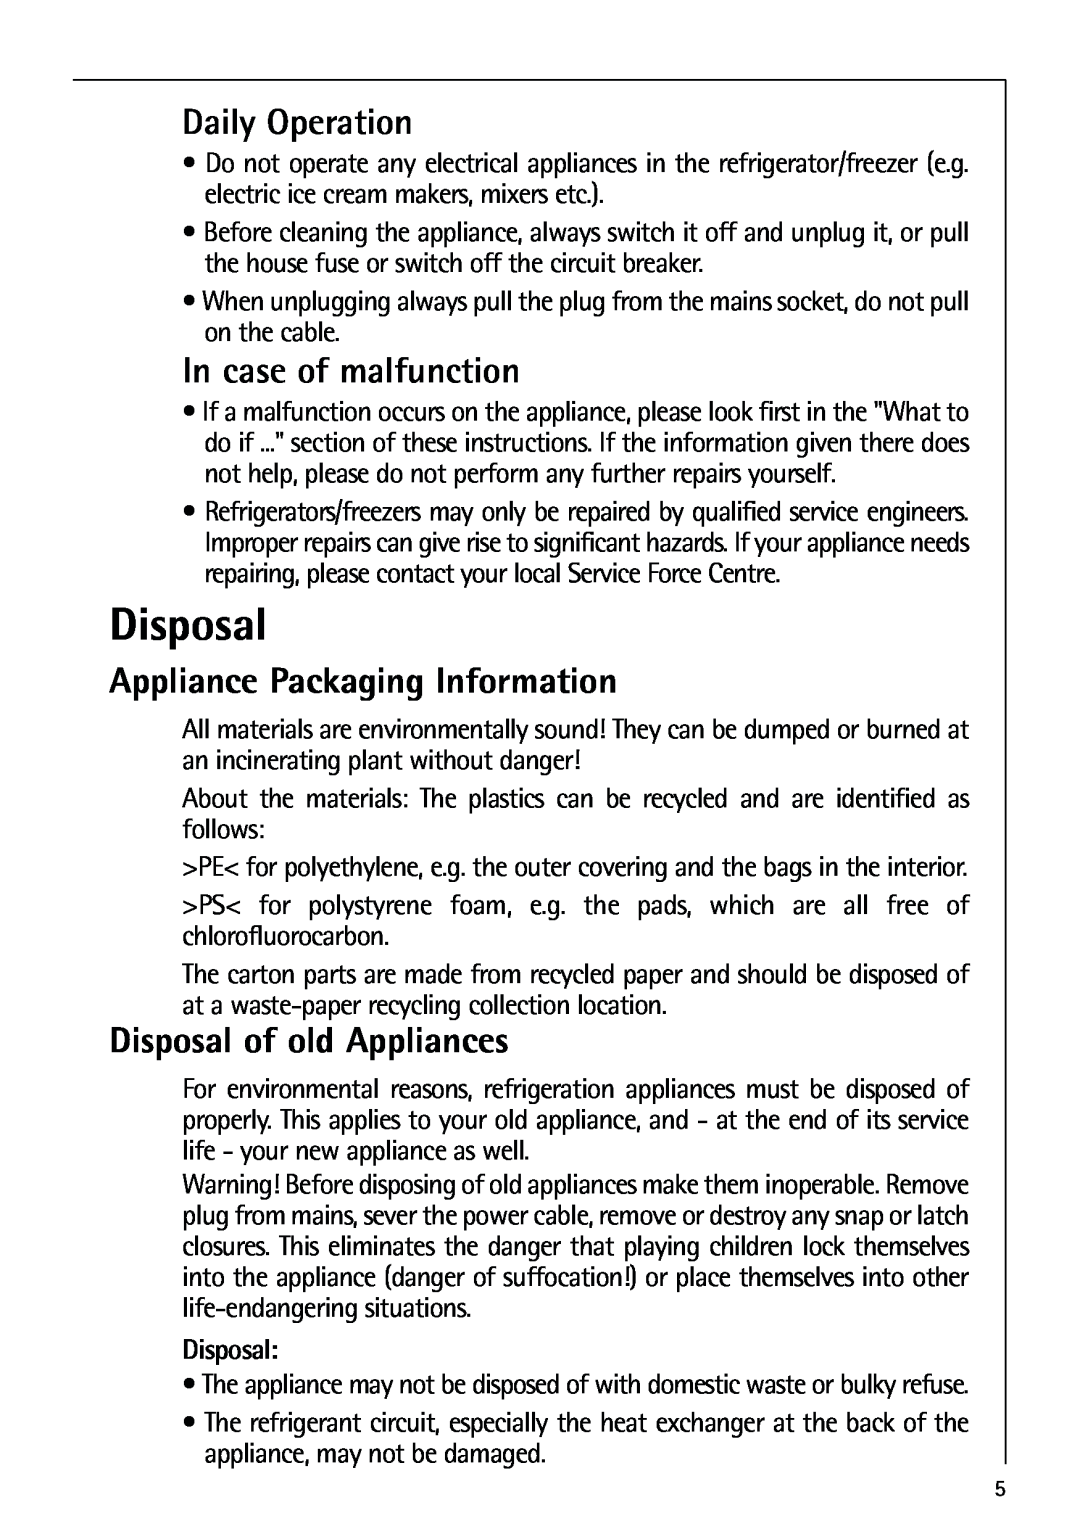 Electrolux 72398 KA user manual Disposal, Daily Operation, In case of malfunction, Appliance Packaging Information 